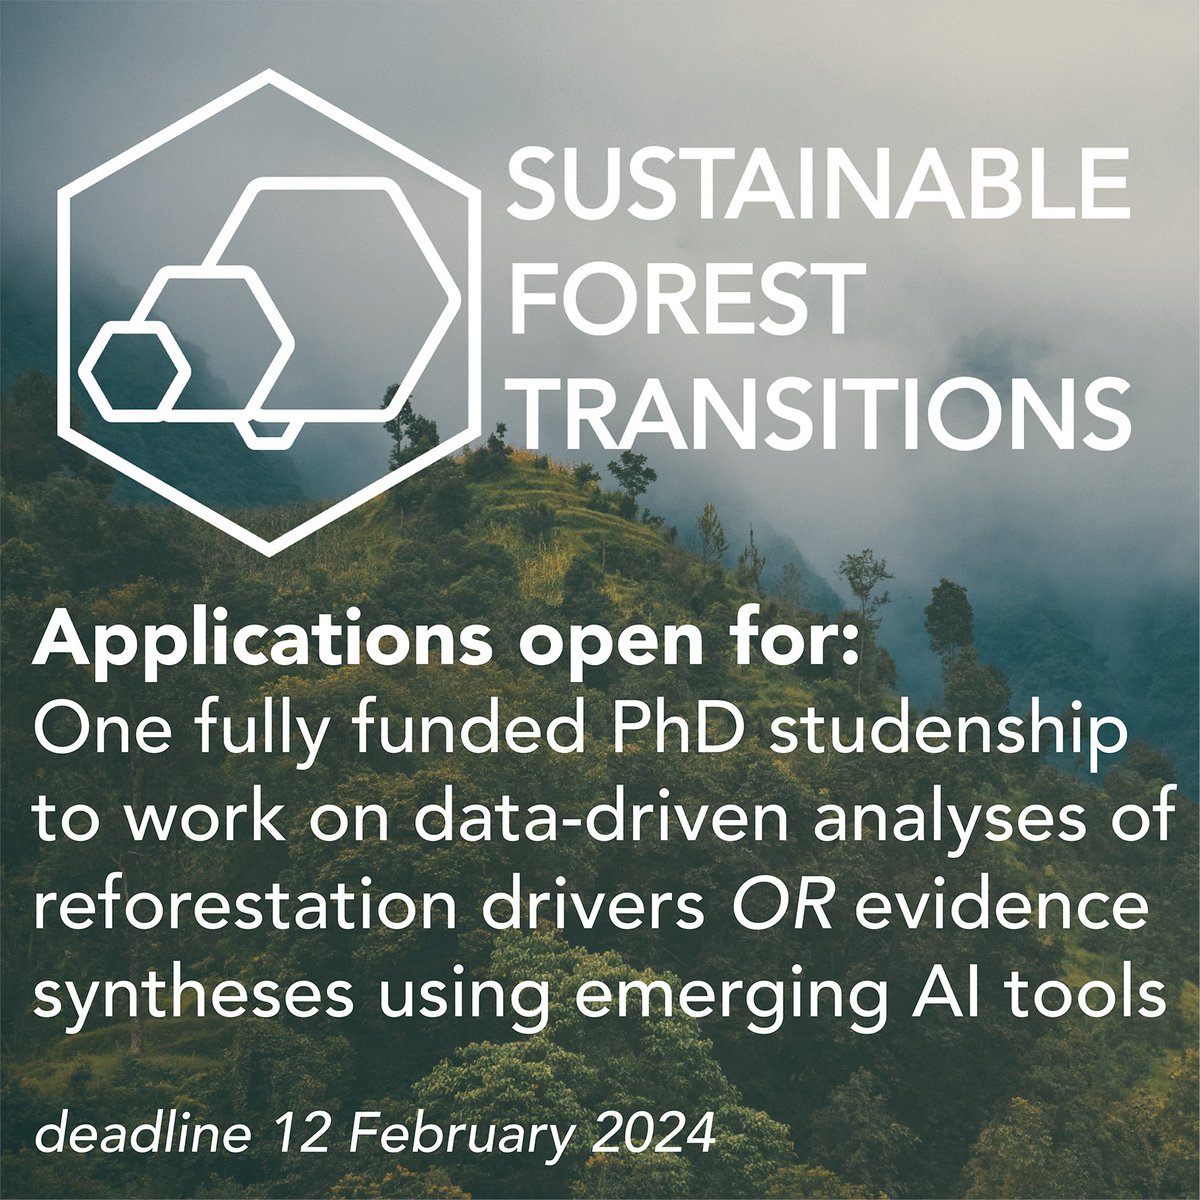 🚨Interested in #ForestRestoration, #Data, #CausalInference and/OR #EvidenceSynthesis? Consider applying for this #PHD studentship with our  #SustainableForestTransitions team. The position is fully funded and open to international students. For more info tinyurl.com/yxsafn79